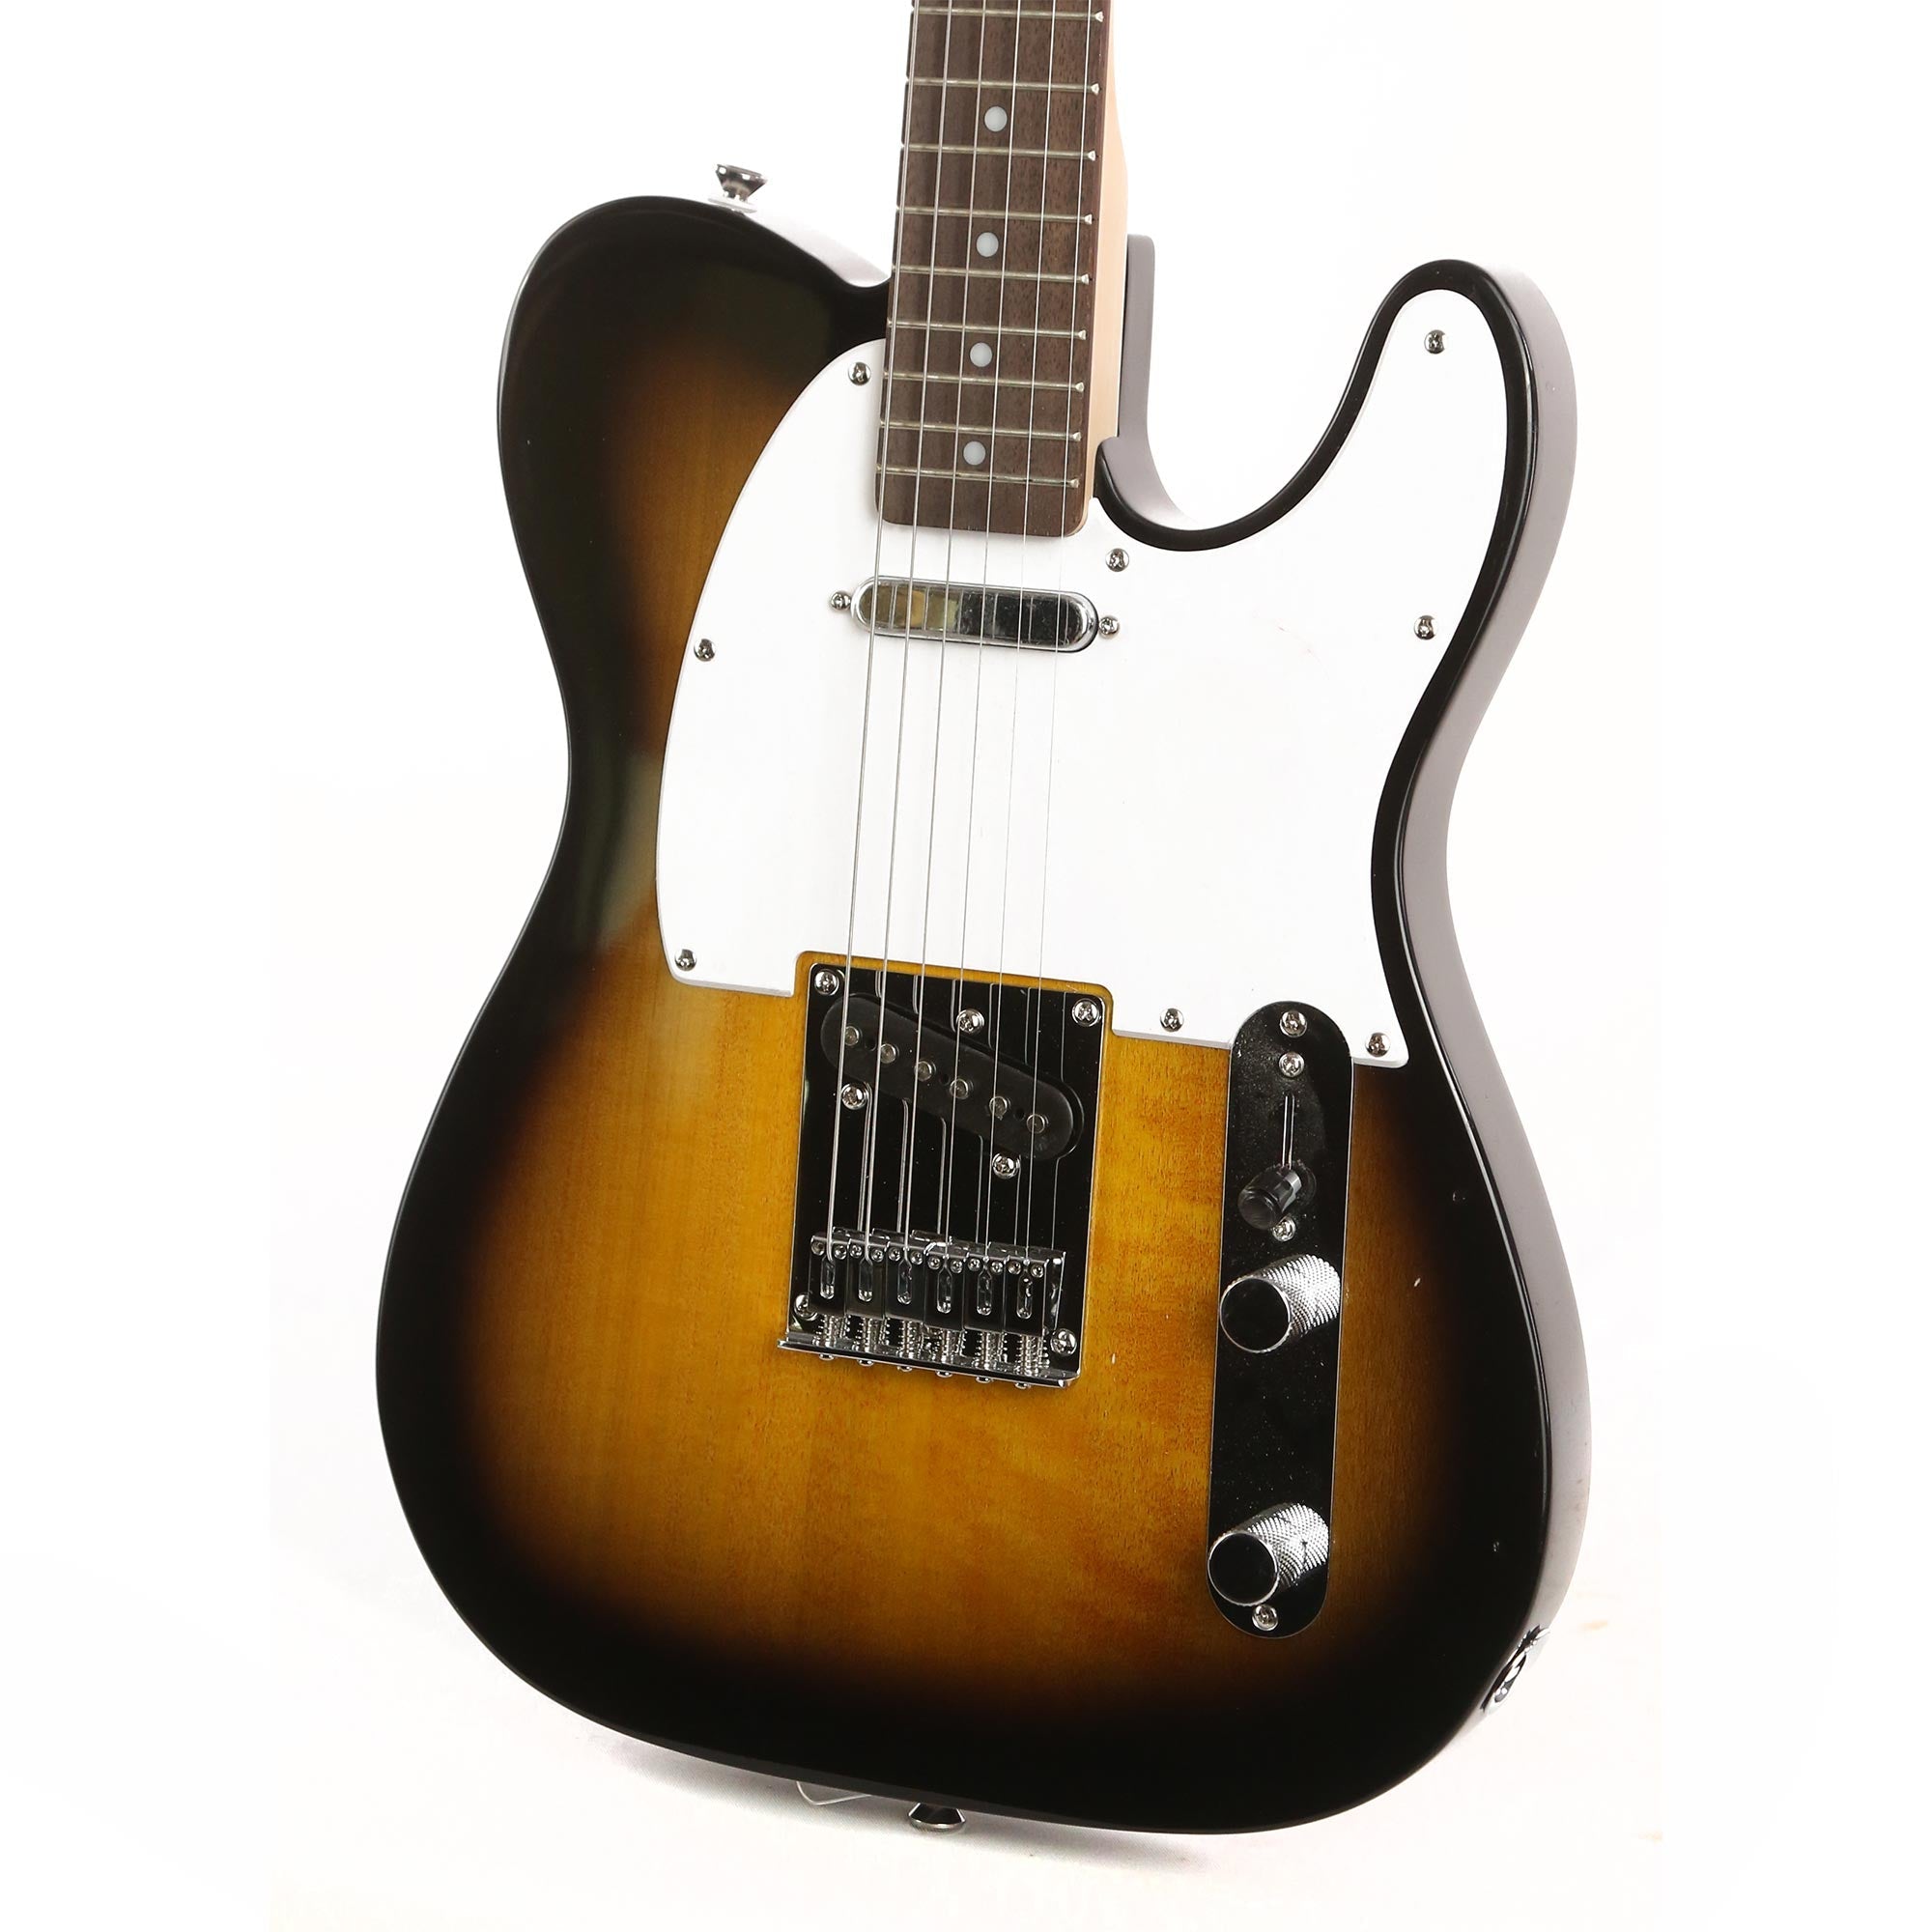 Squier Bullet Telecaster Brown Sunburst Used | The Music Zoo